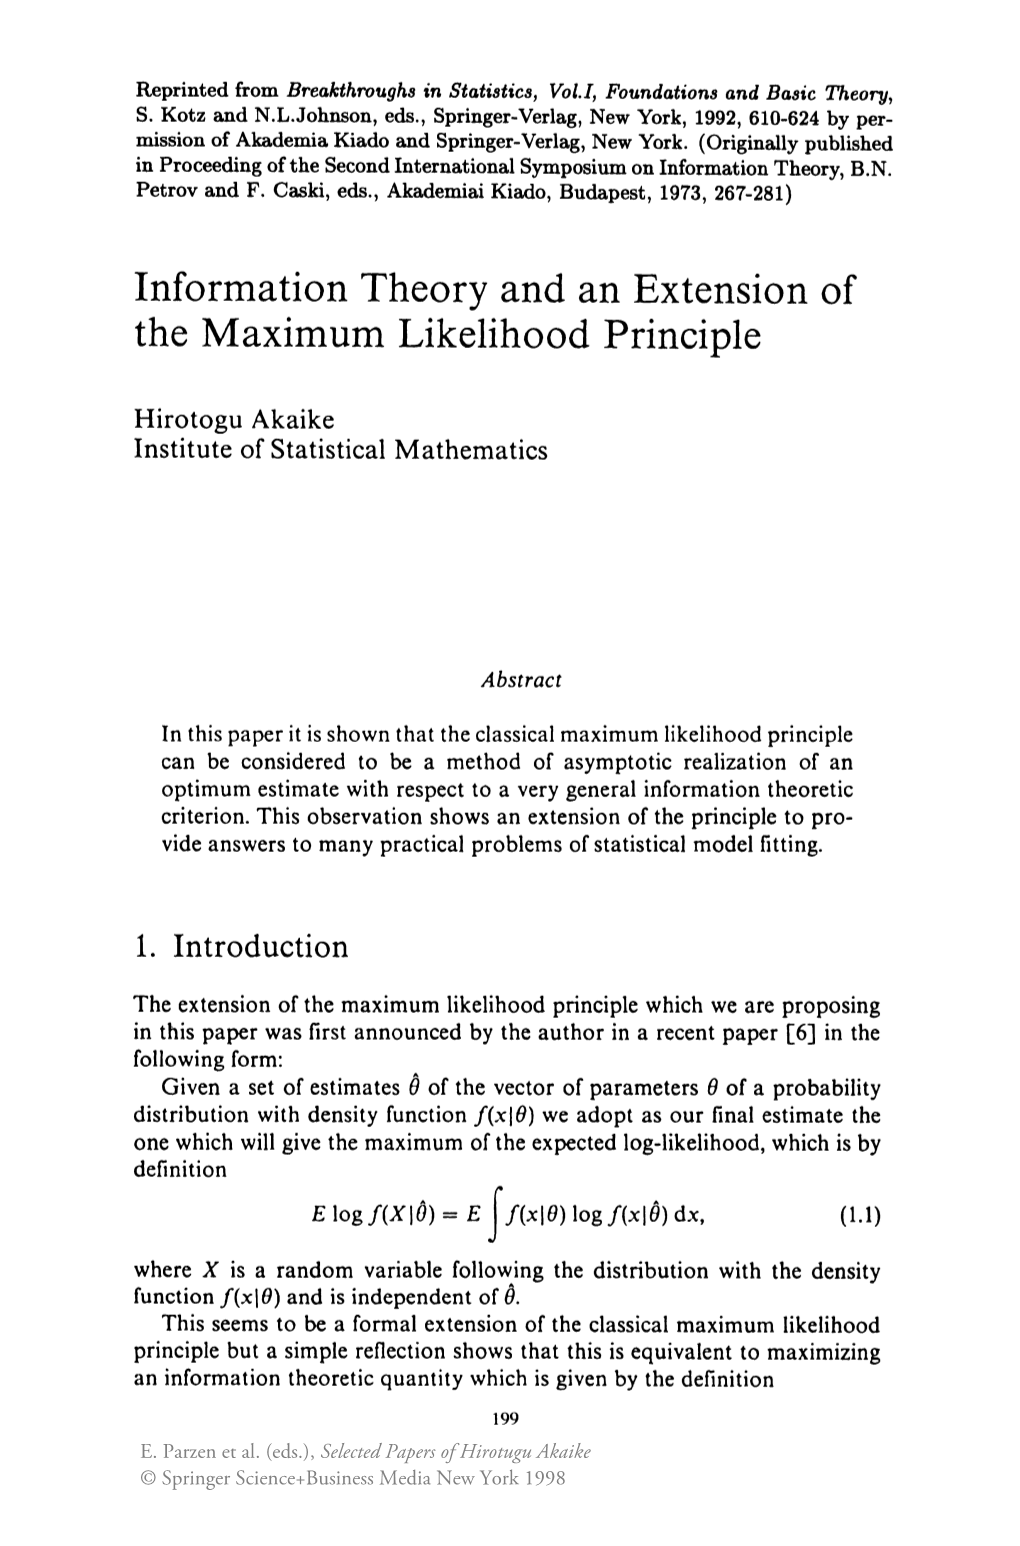 Information Theory and an Extension of the Maximum Likelihood Principle 201